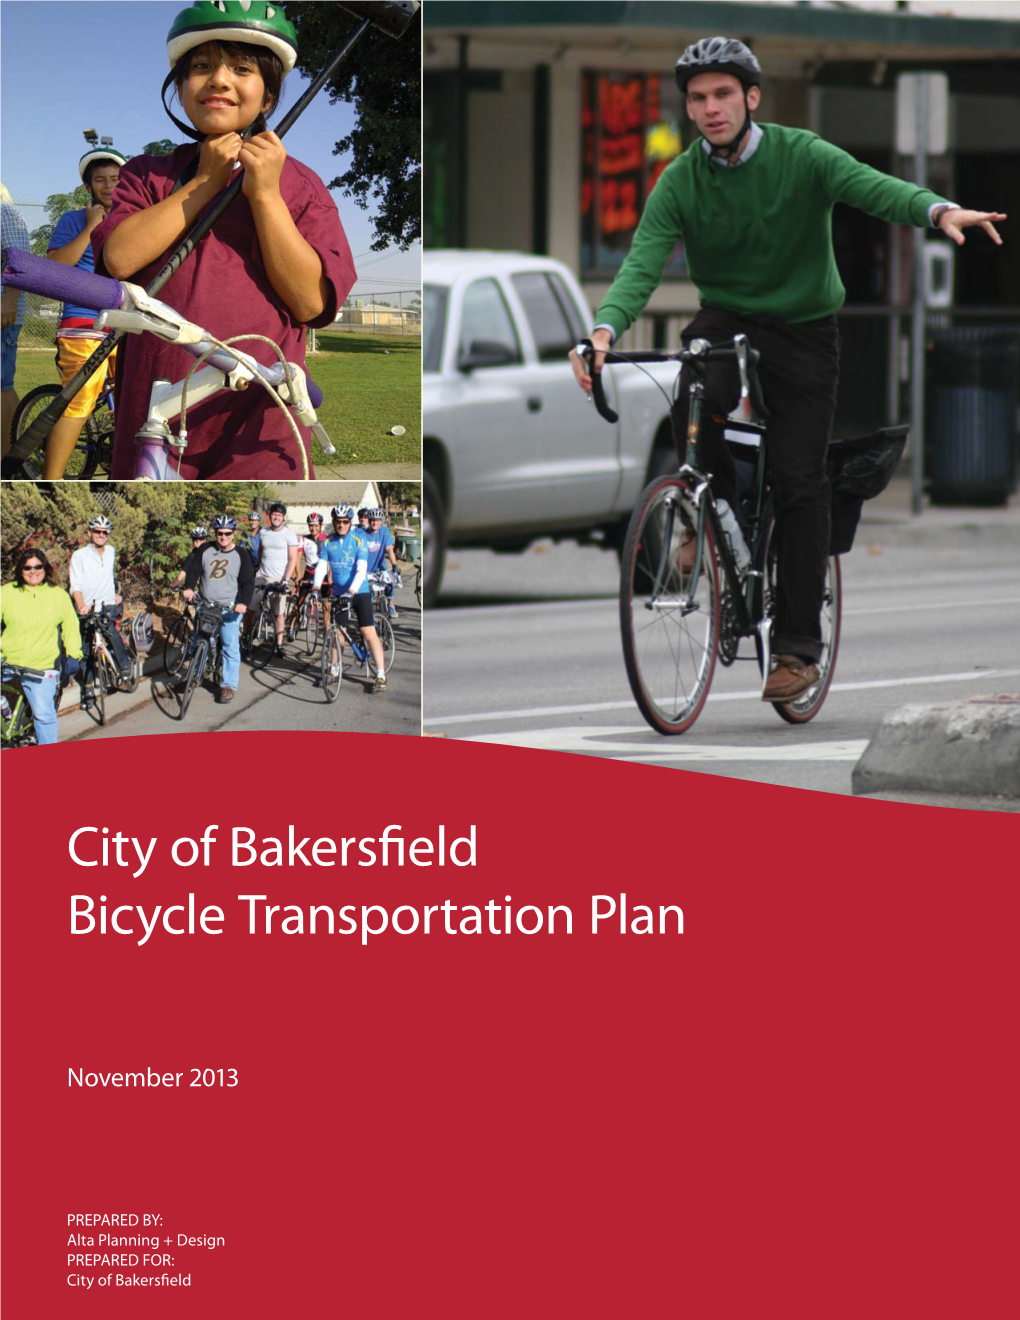 City of Bakersfield Bicycle Transportation Plan